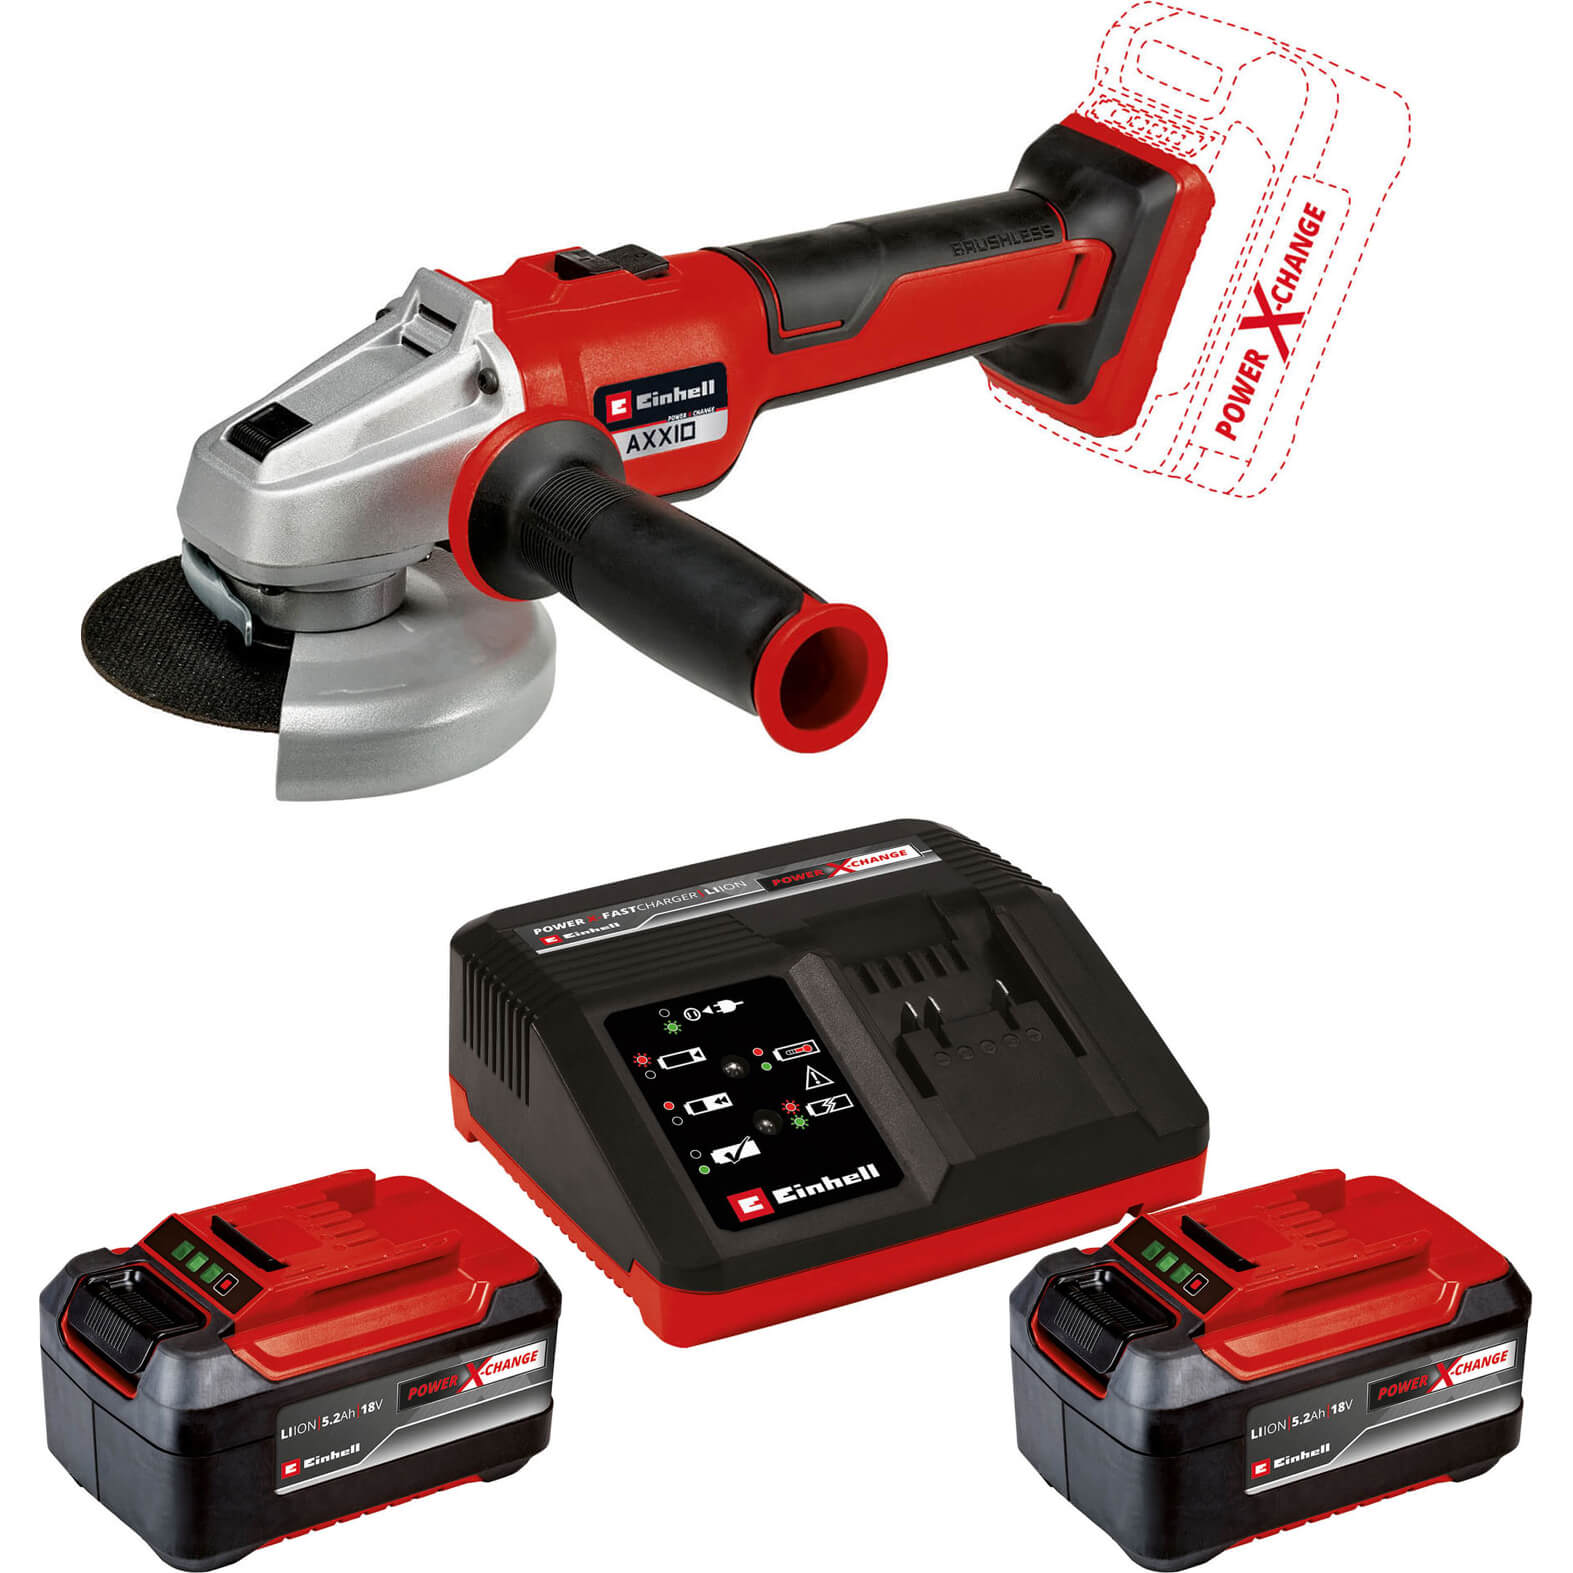 Image of Einhell AXXIO 18/125 Q 18v Quick Release Brushless Angle Grinder 125mm 2 x 5.2ah Li-ion Charger No Case